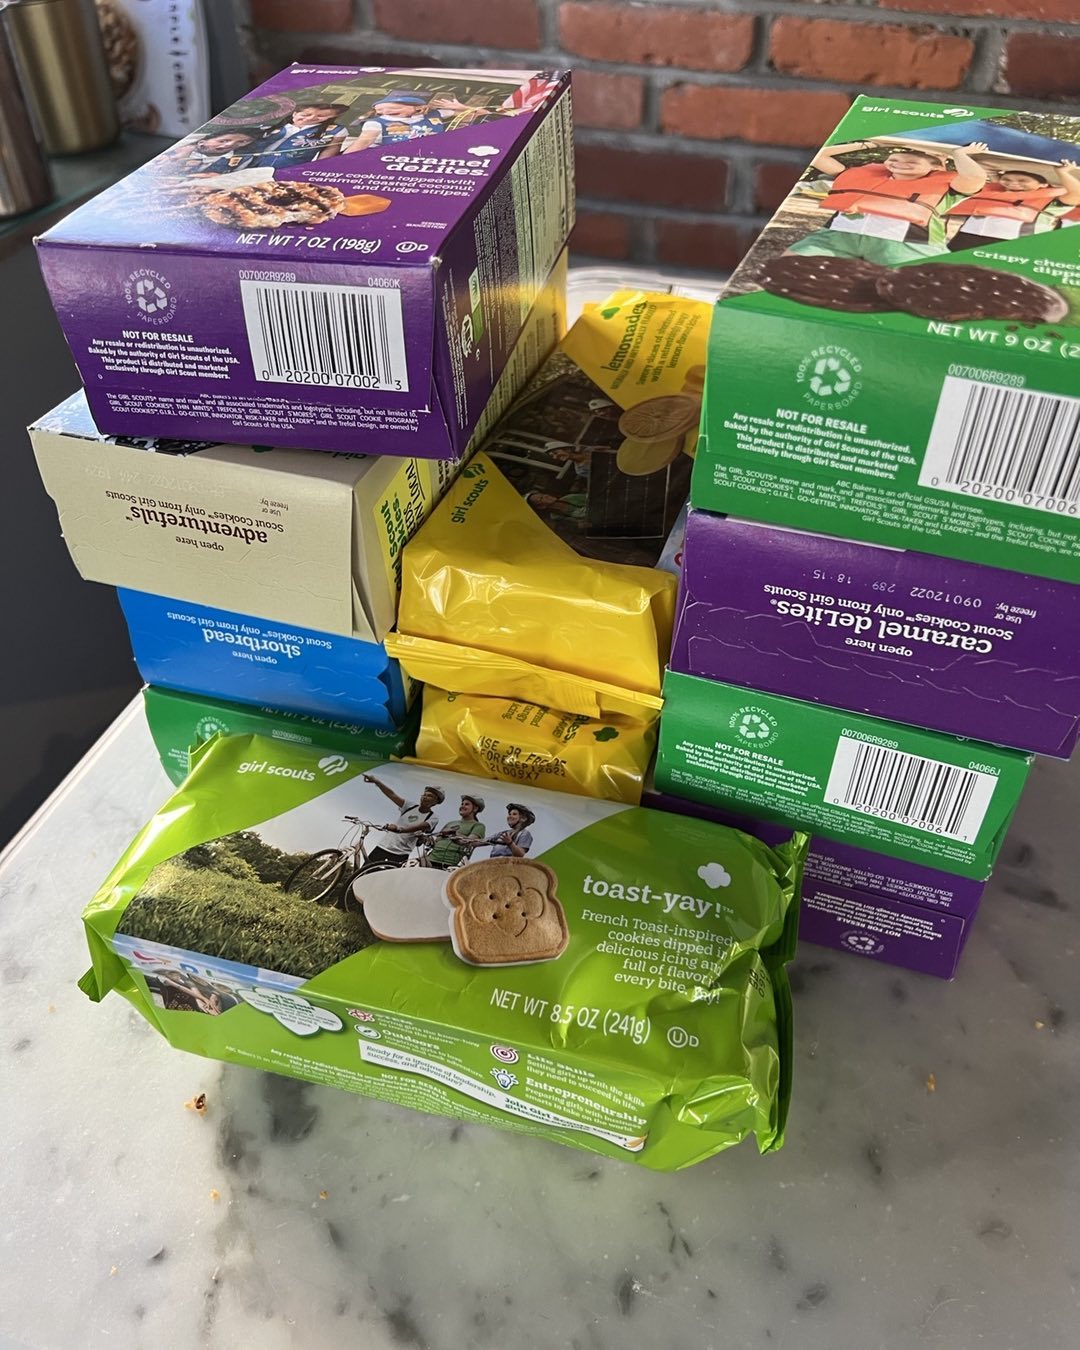 This is what happens when I get sent on a Saturday afternoon Target run during ⁦‪@girlscouts‬⁩ cookie season. Those poor kids were freezing cold…the faster they sold out of cookies, the sooner they could get inside and warm up. I think of it as a humanitarian gesture! 😏